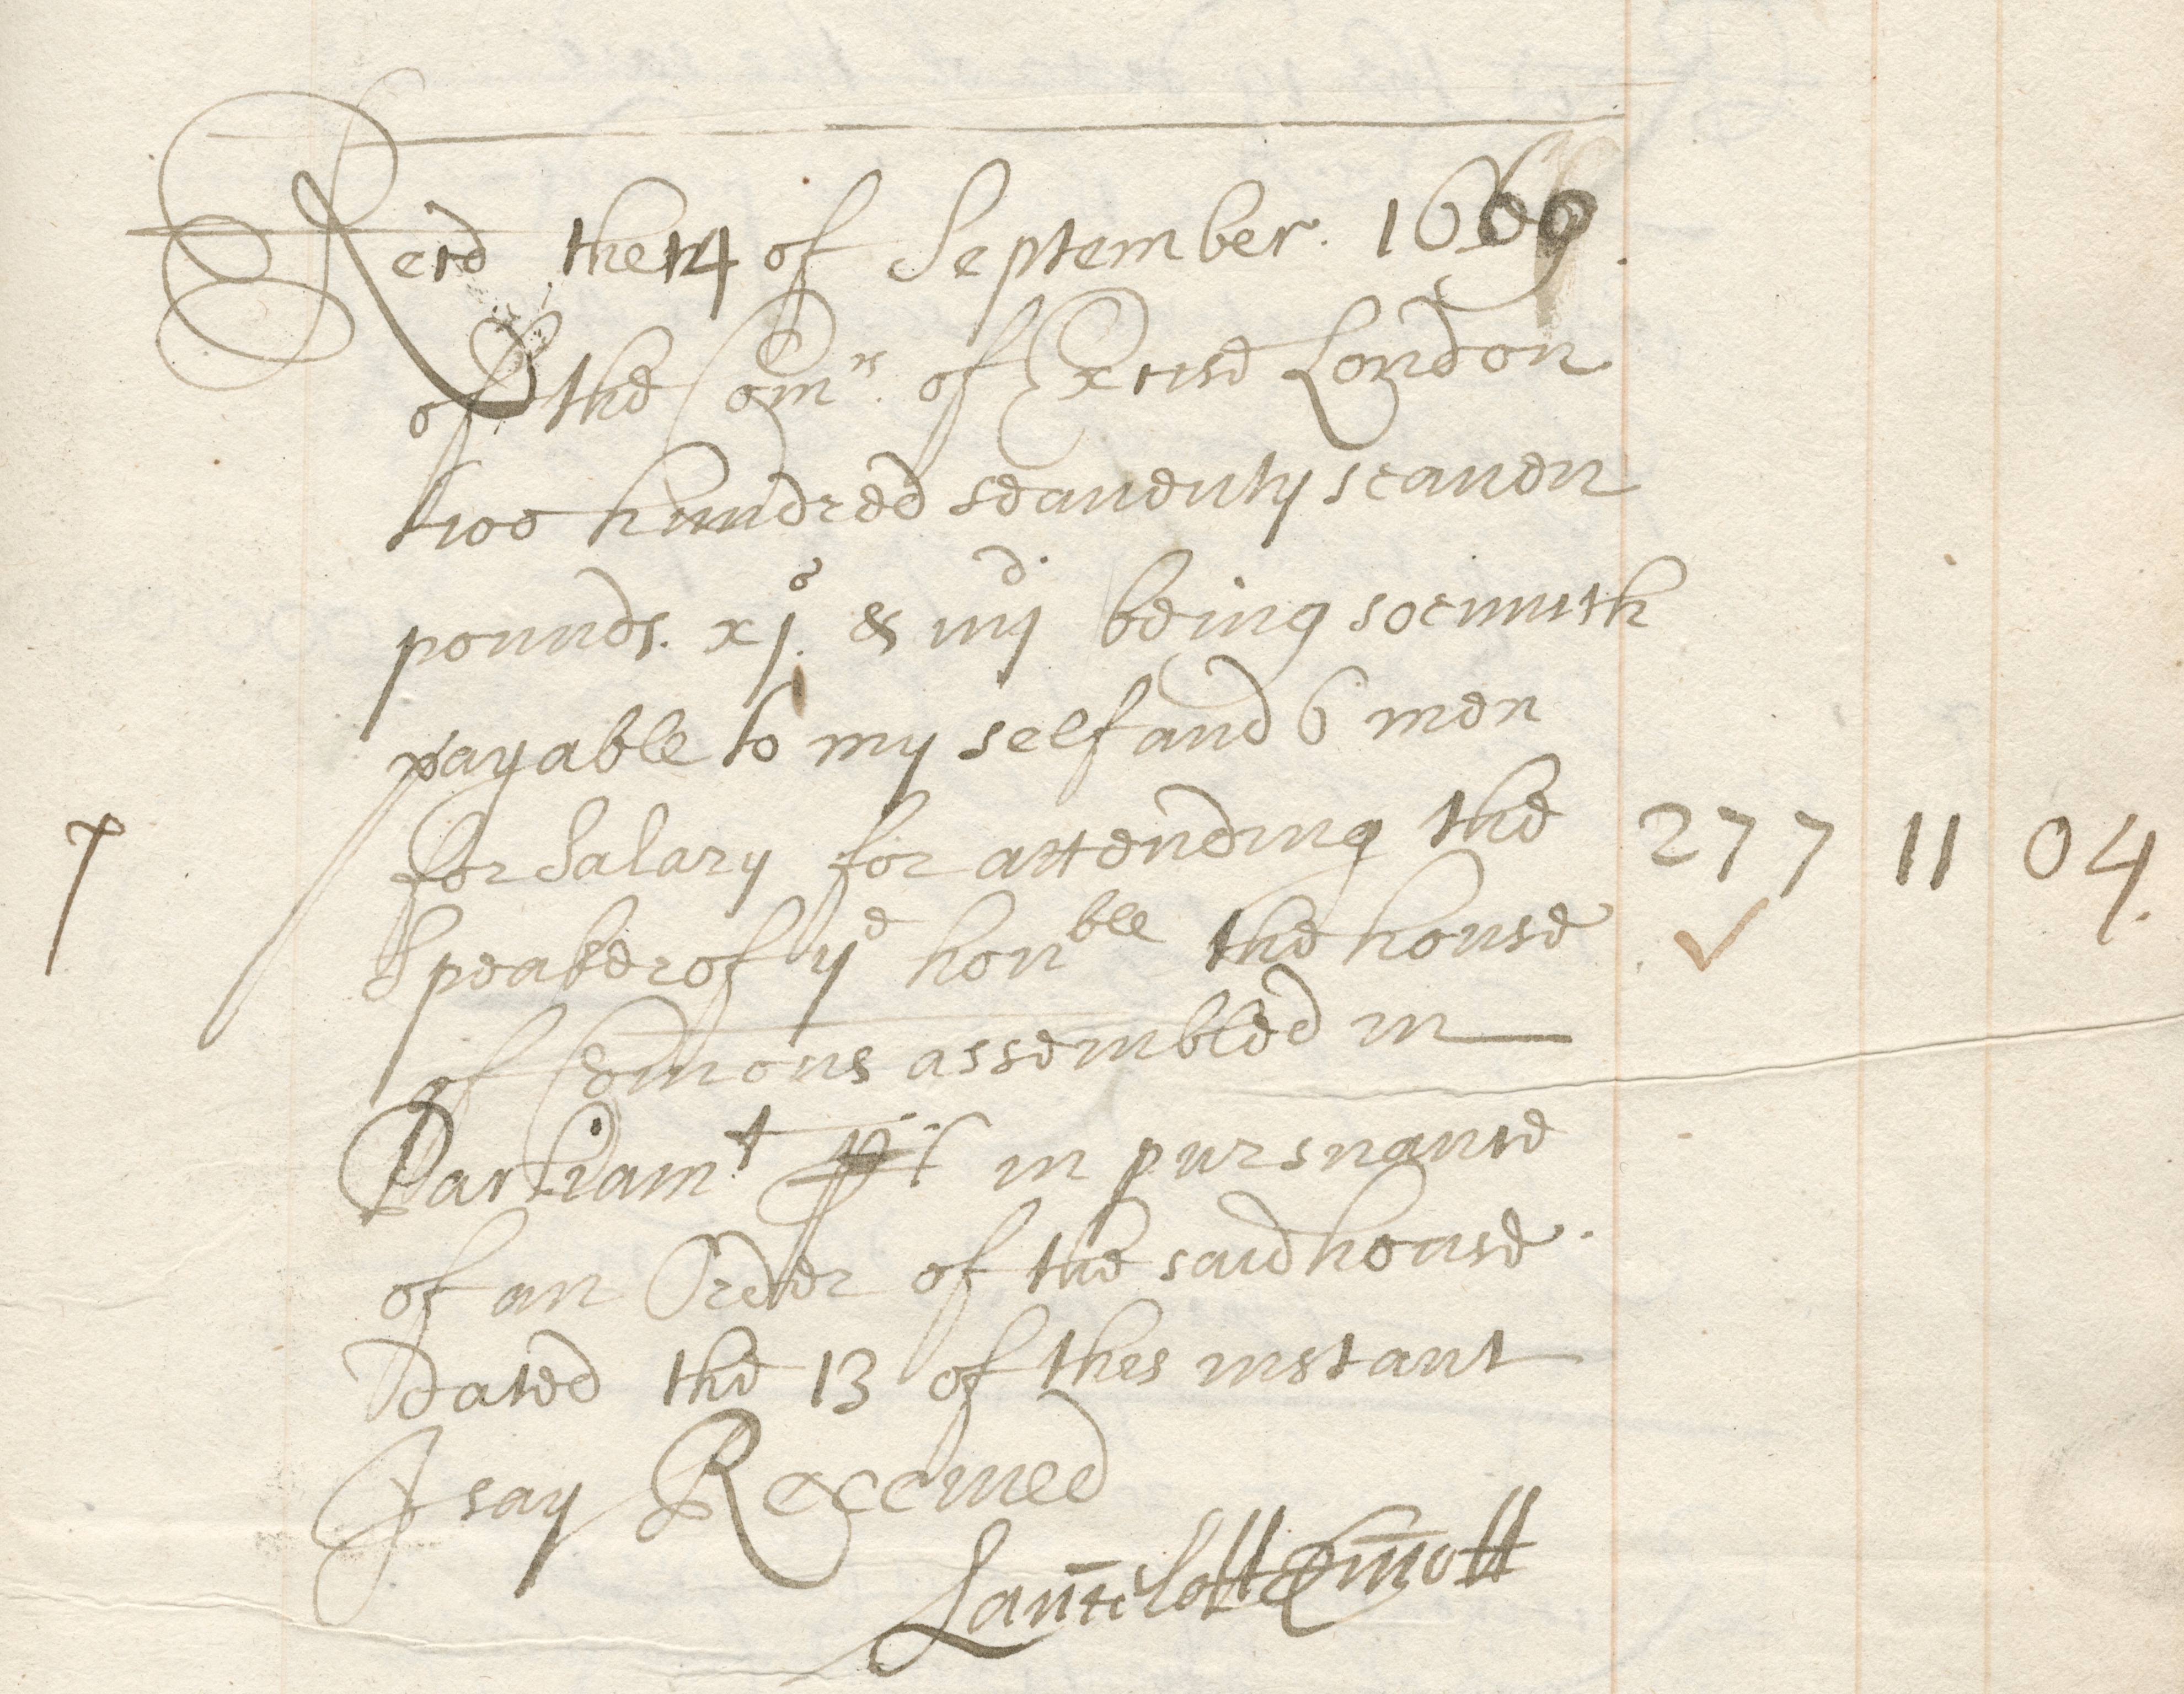 BANKING AND GOVERNMENT – EDWARD BACKWELL Banking ledger kept in person by Edward Backwell, Excise... - Image 5 of 7